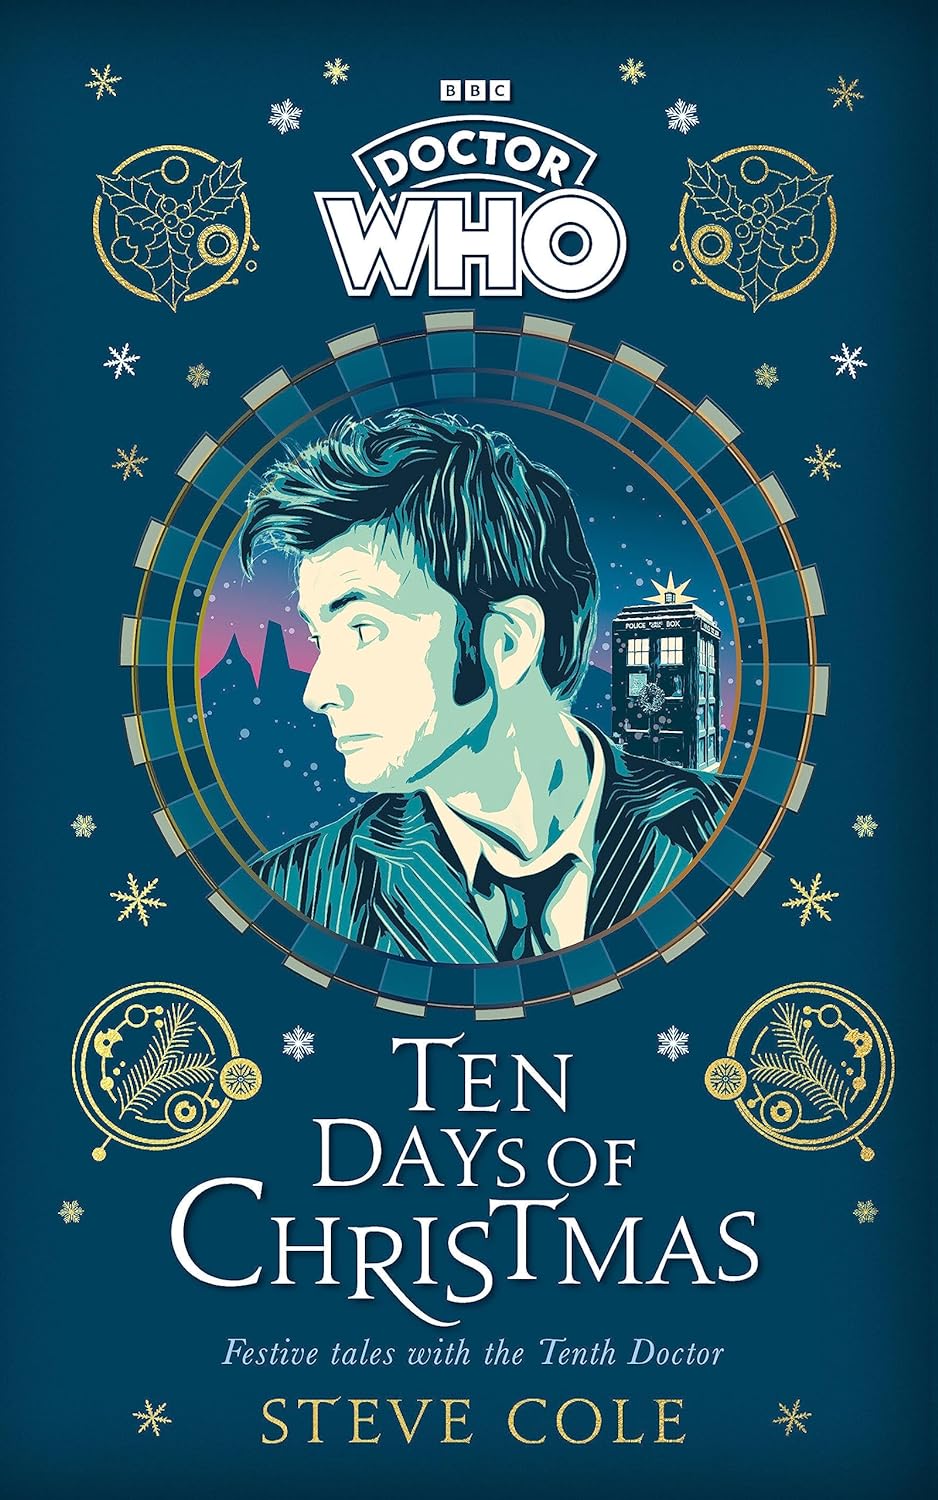 Doctor Who: Ten Days of Christmas - Festive Tales with the Tenth Doctor by Steve Cole